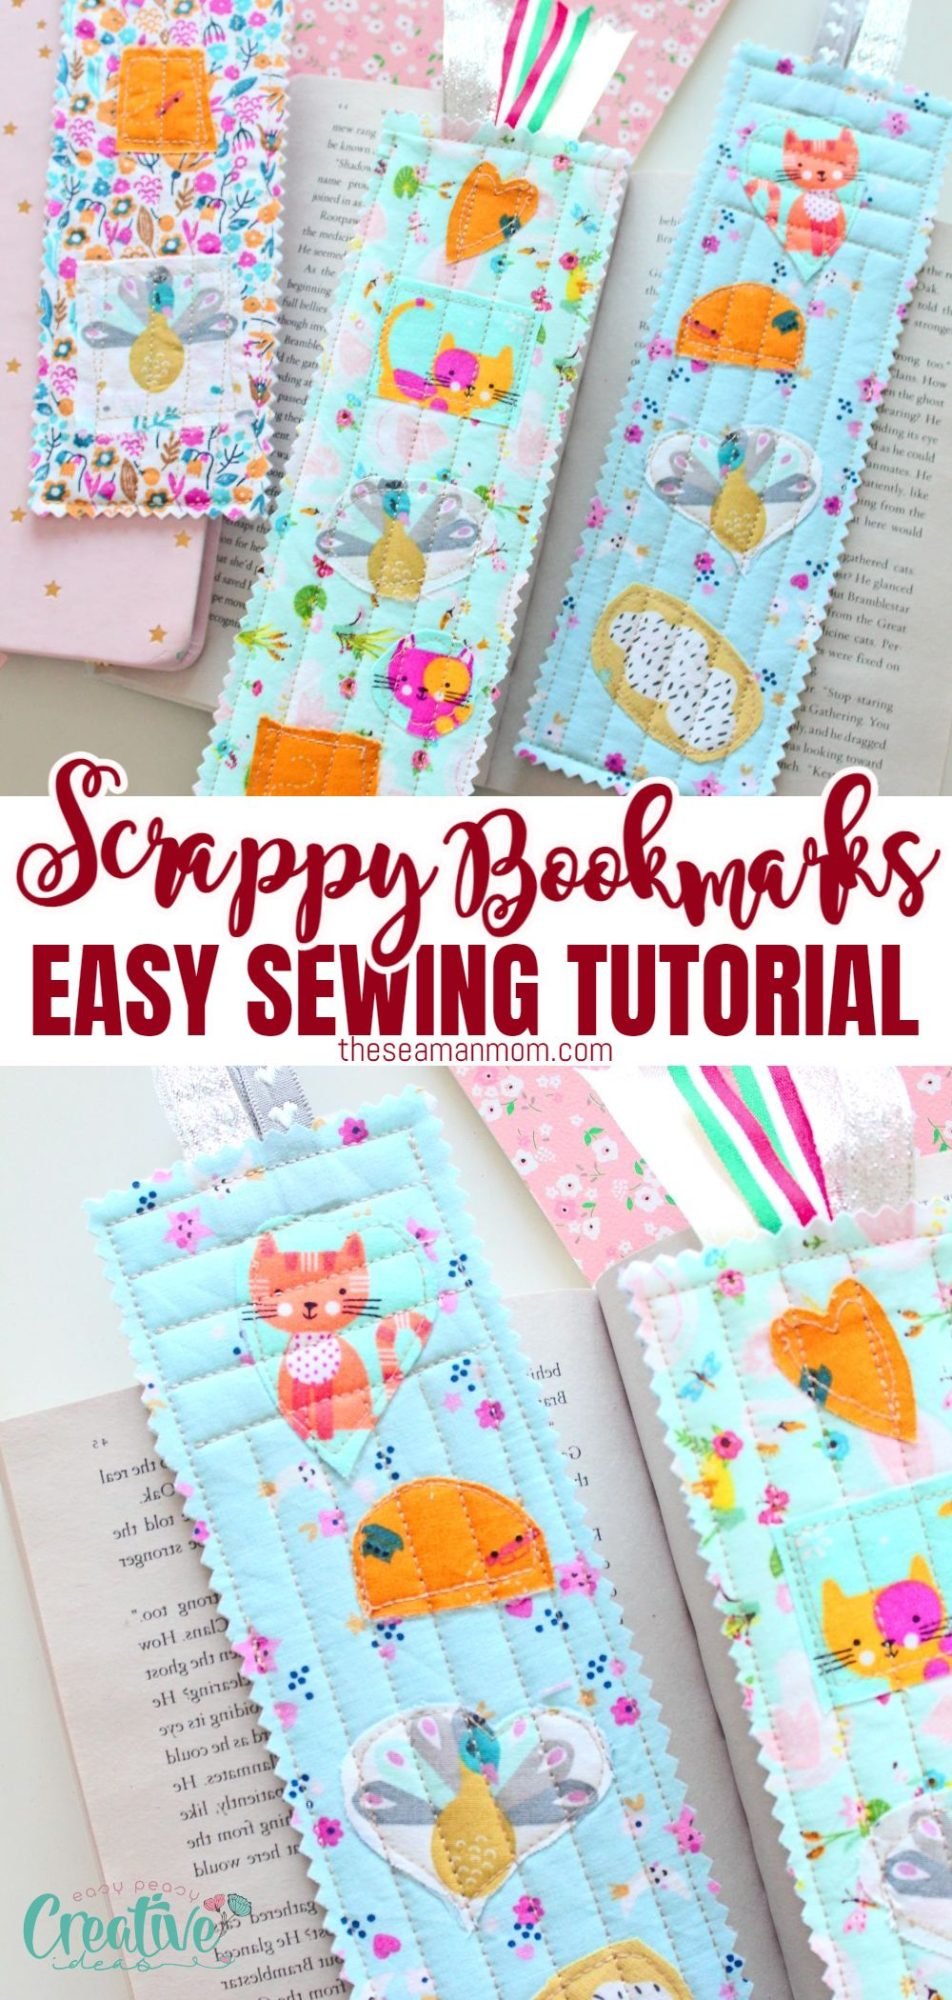 Quick and Easy Fabric Bookmarks with scraps of fabric